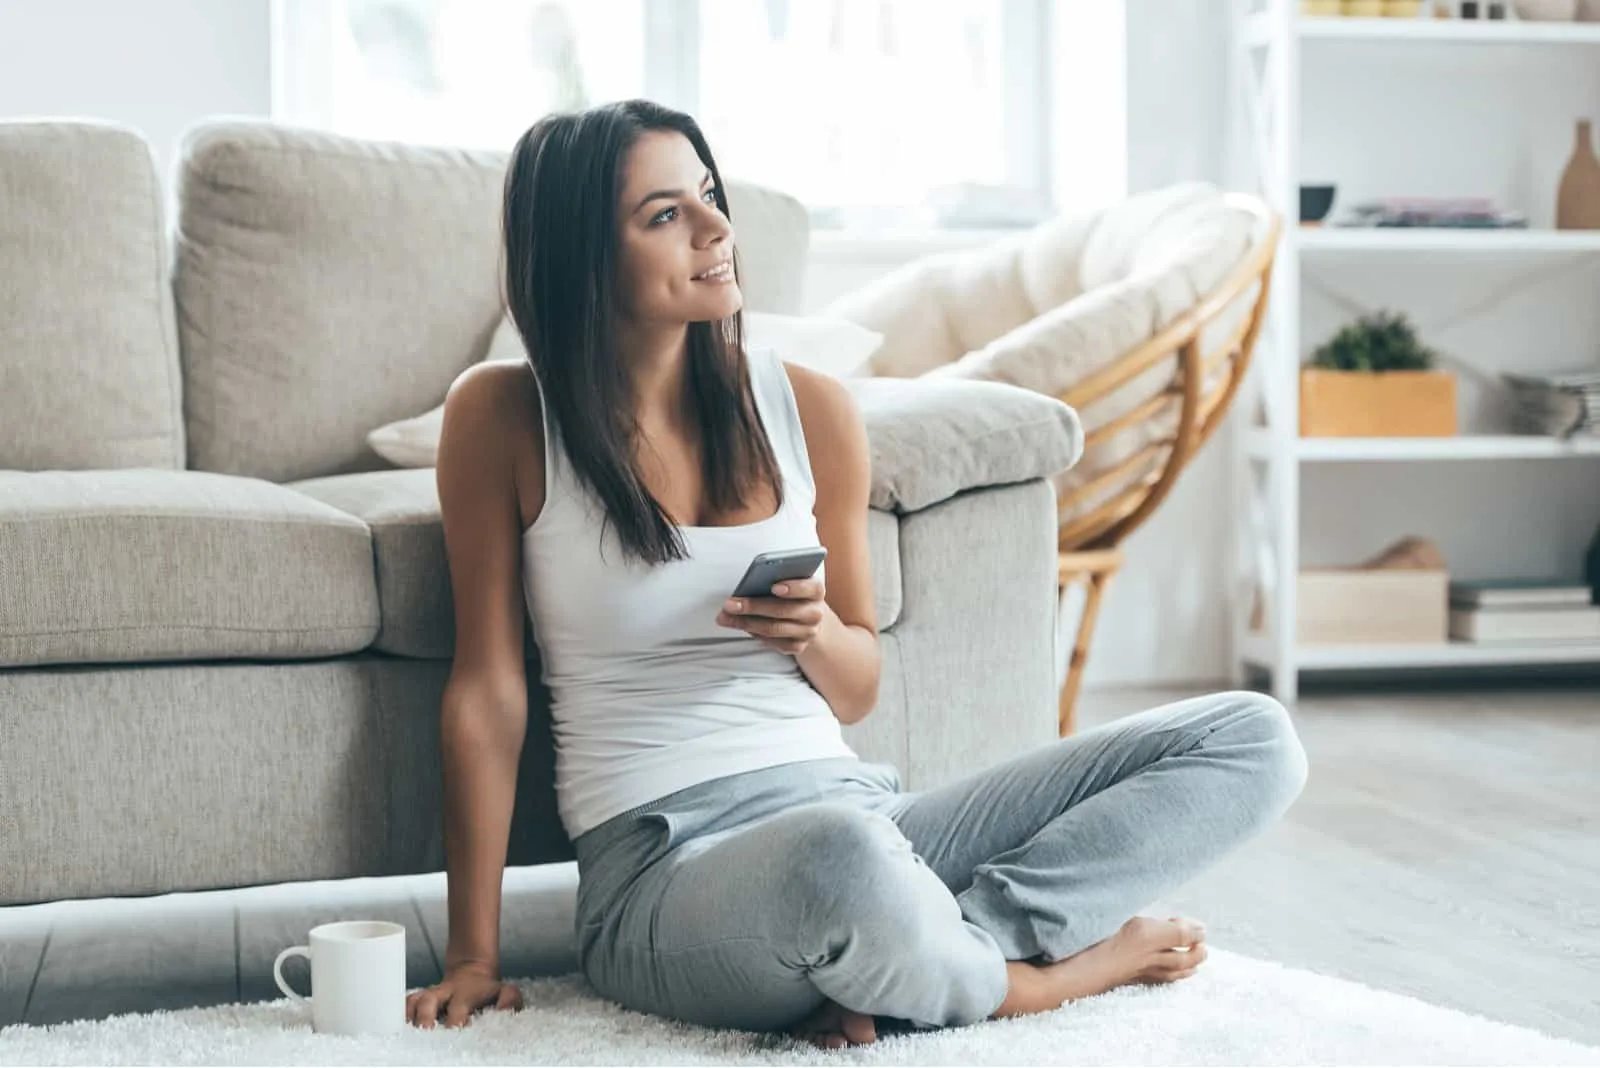 happy woman sitting on the floor with mobile phone in hand